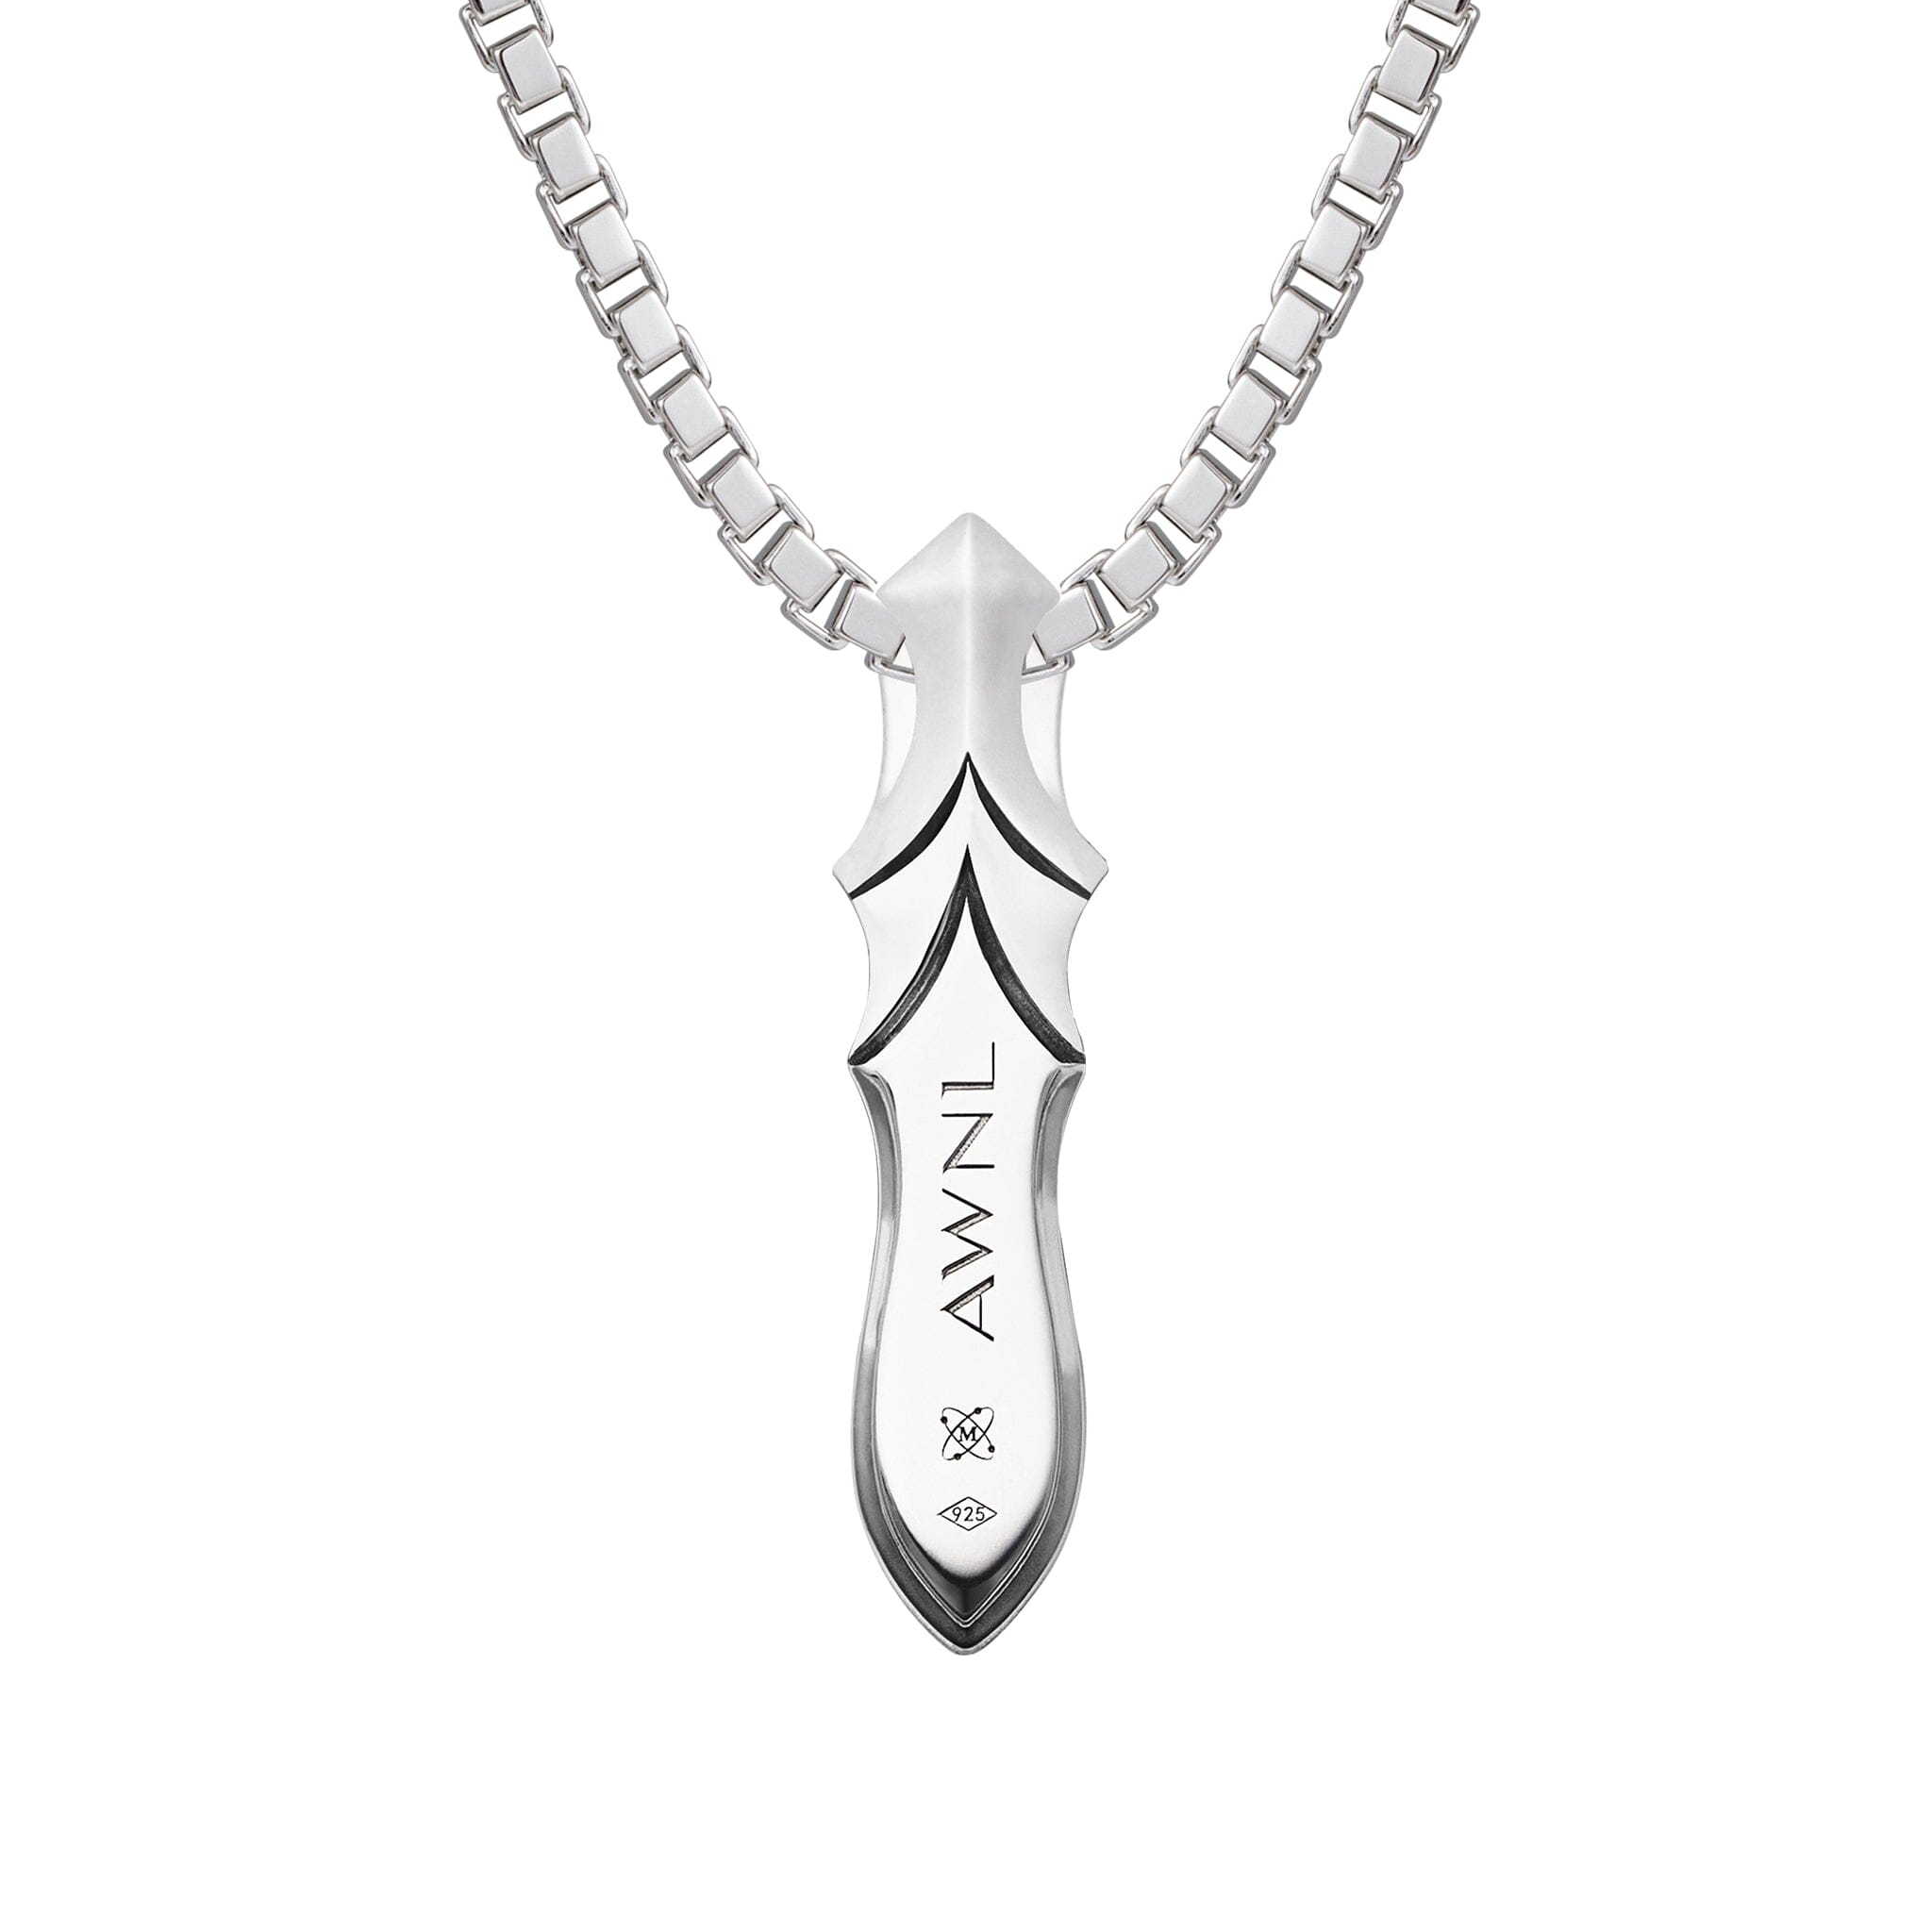 Men's Blade of Seven Seas Necklace with Meteorite Necklaces WAA FASHION GROUP 